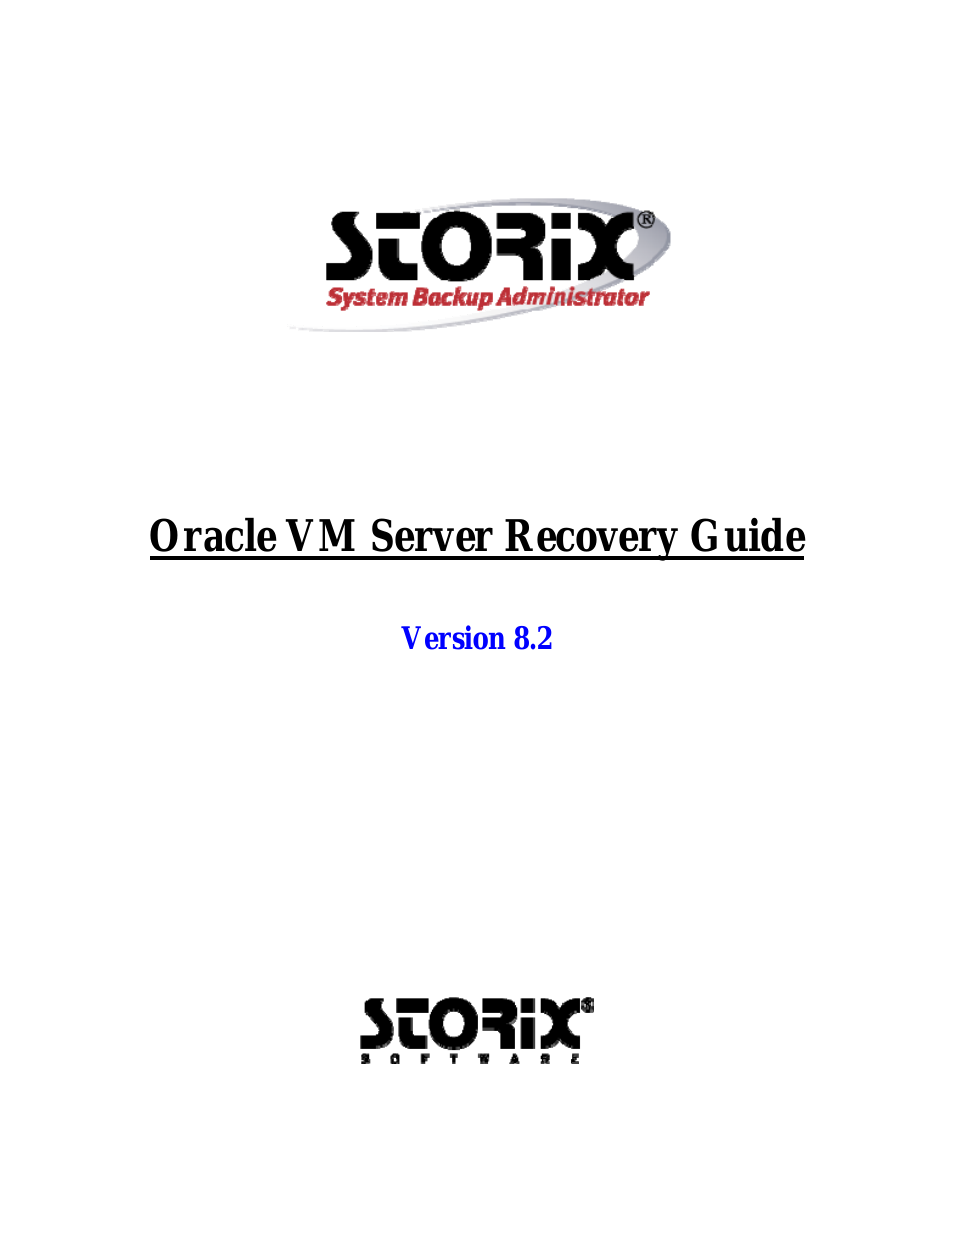 SBAdmin Oracle VMServer for x86 Recovery Guide